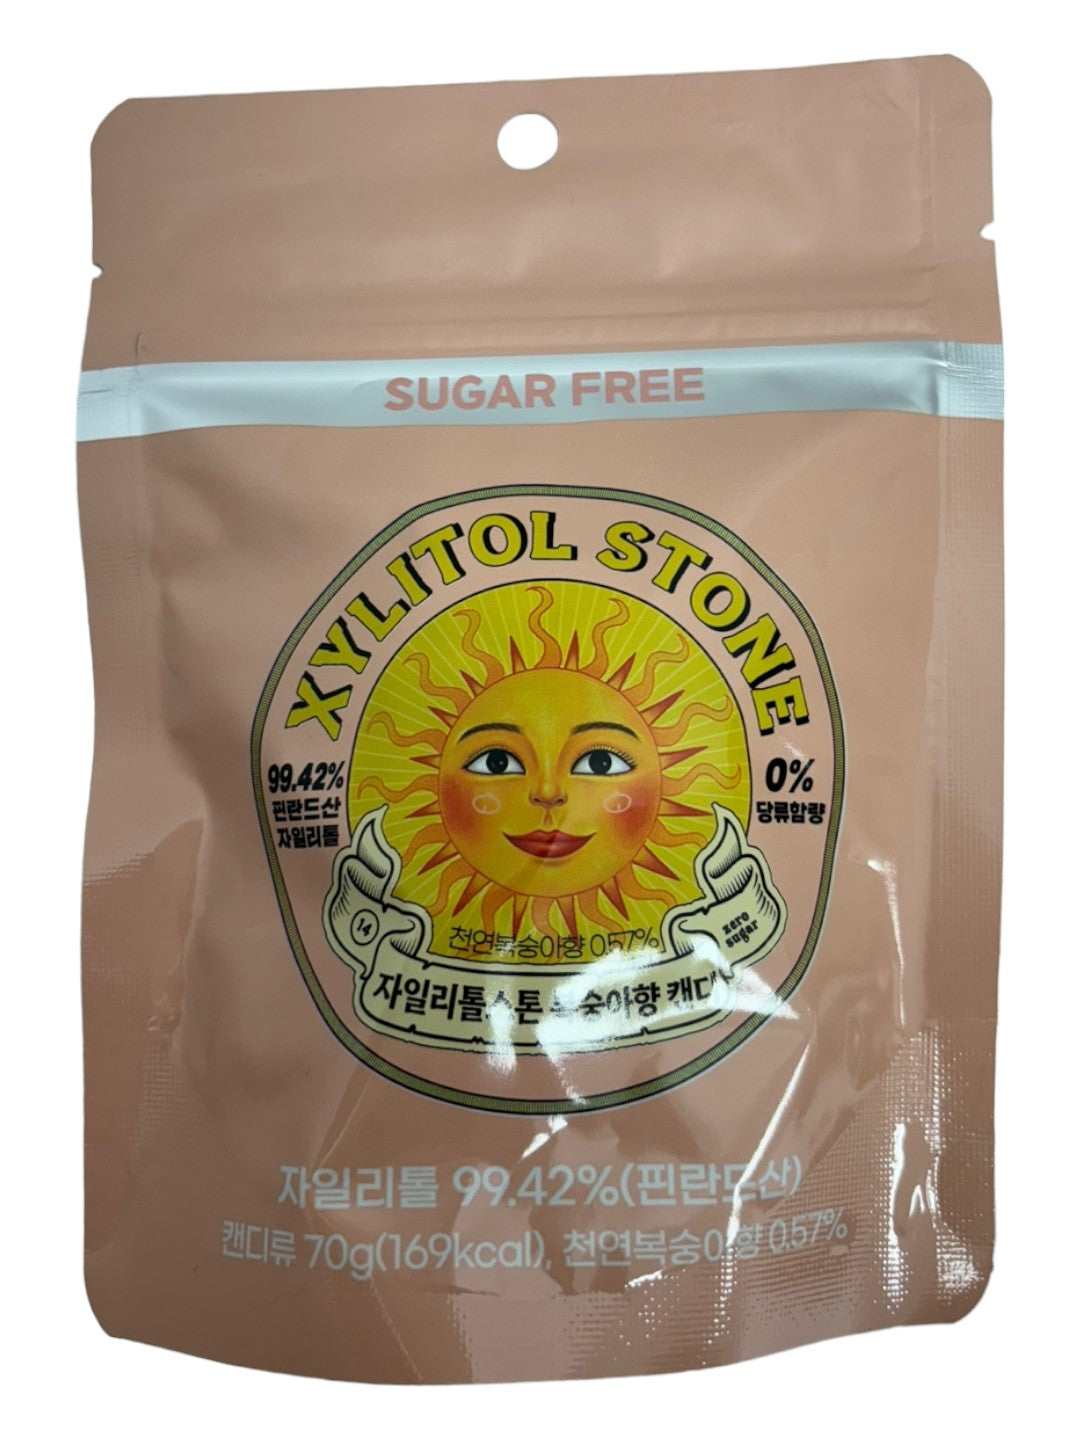 Xylitol Stone Sugar Free Candy 70G Resealable Pouch, Peach